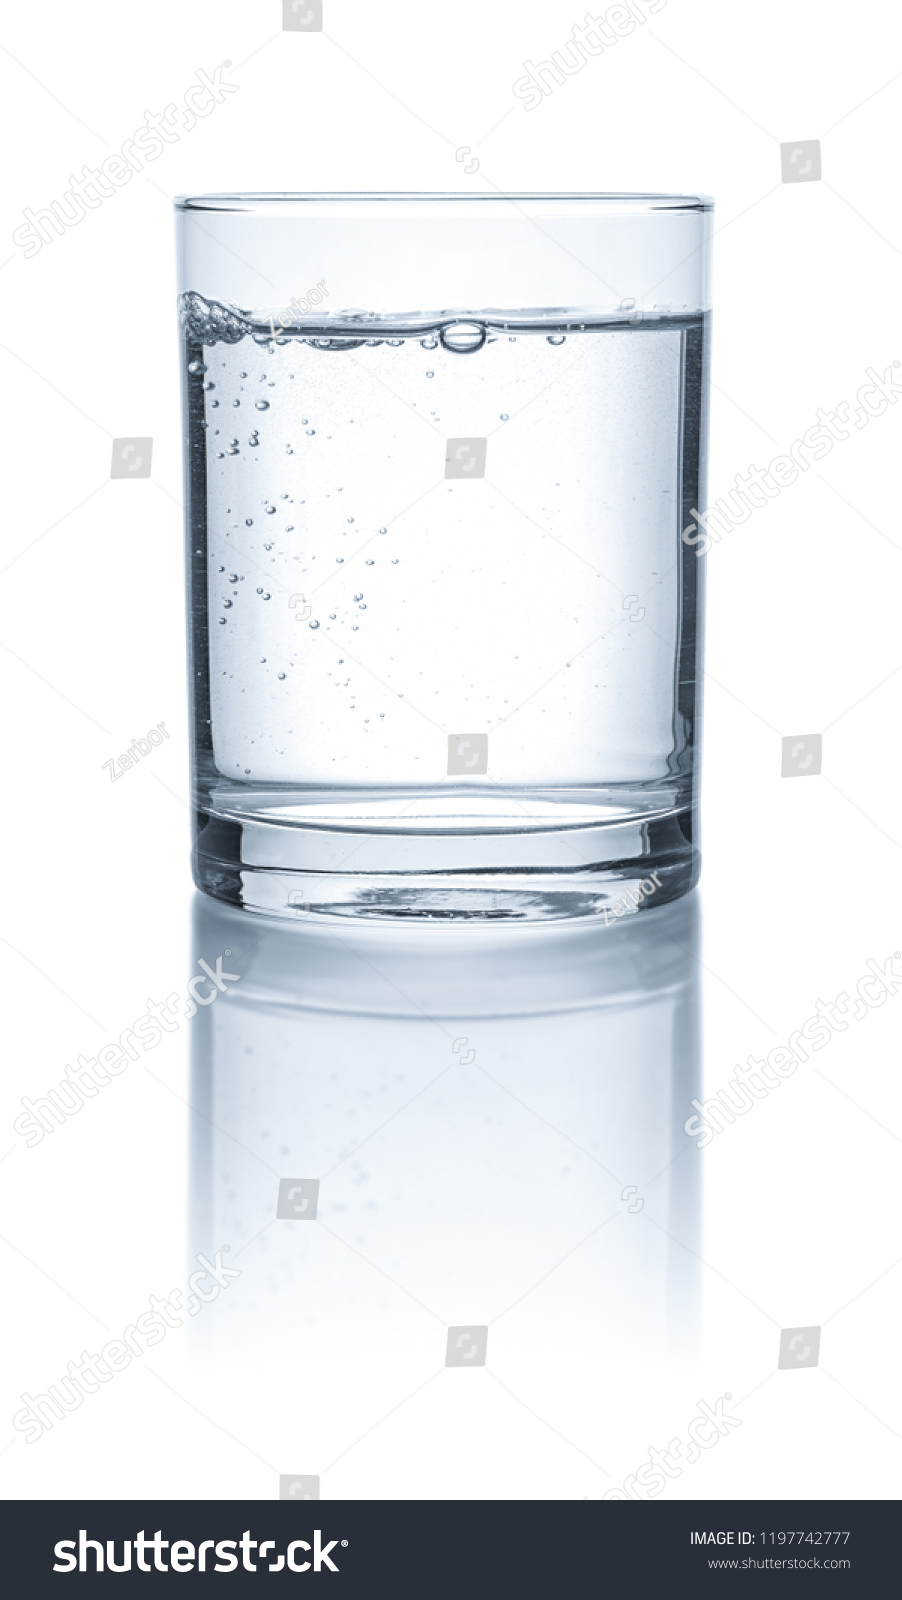 A glass with water on a white background #1197742777